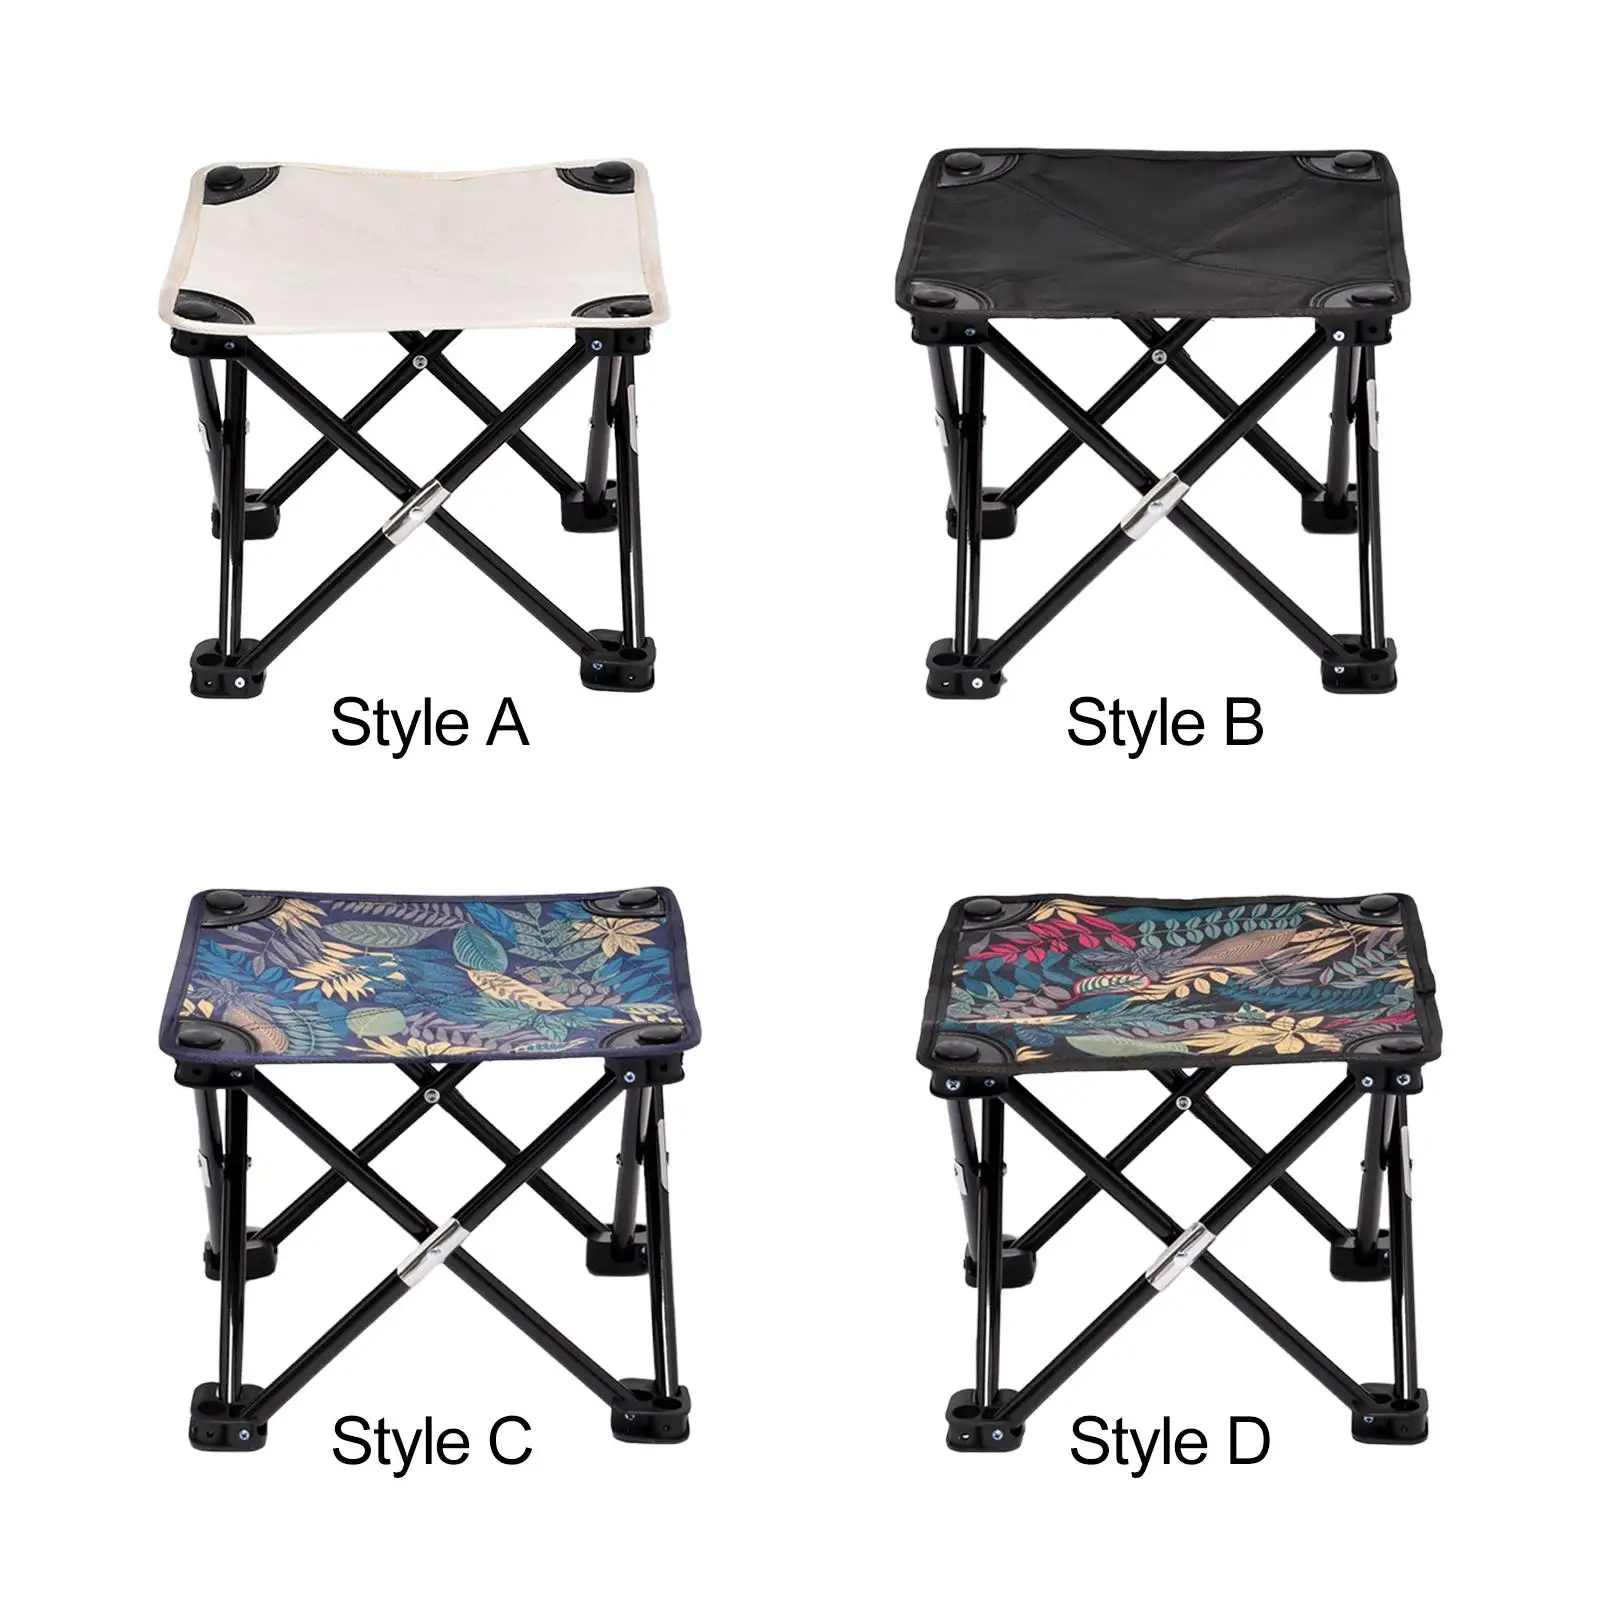 Folding Stools Chair Footrest Aluminum Alloy Portable Camp Stool Collapsible Stool for Patio Backpacking Travel Hiking Picnic